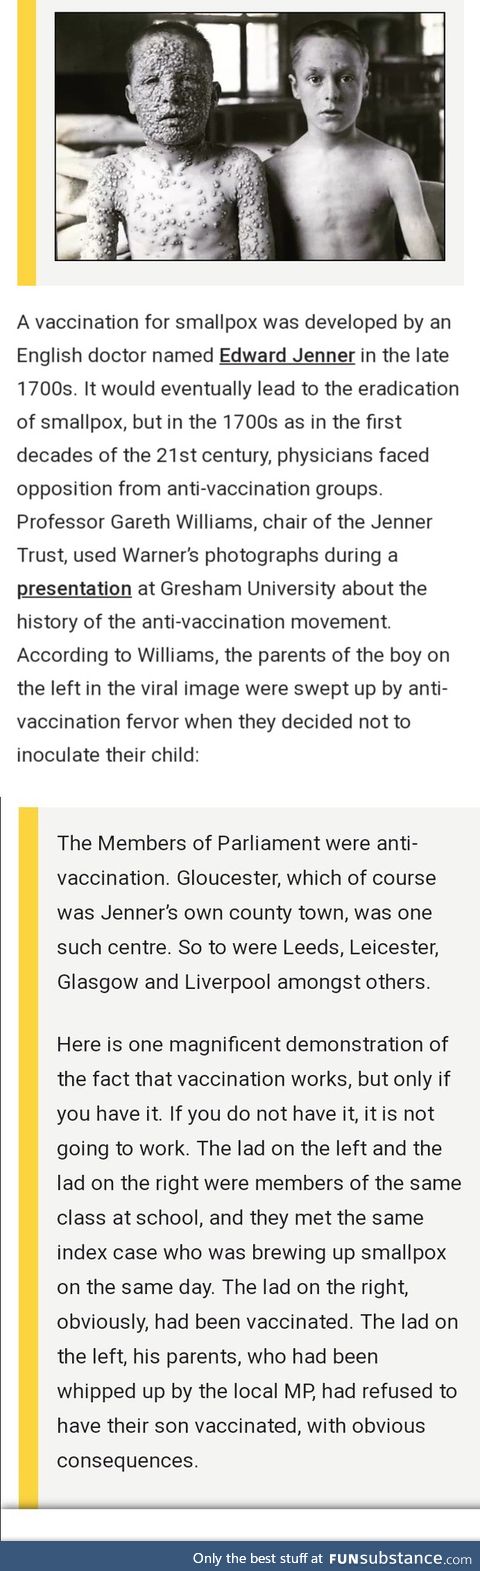 Anti-vaxxing: A privilege of the fortunate